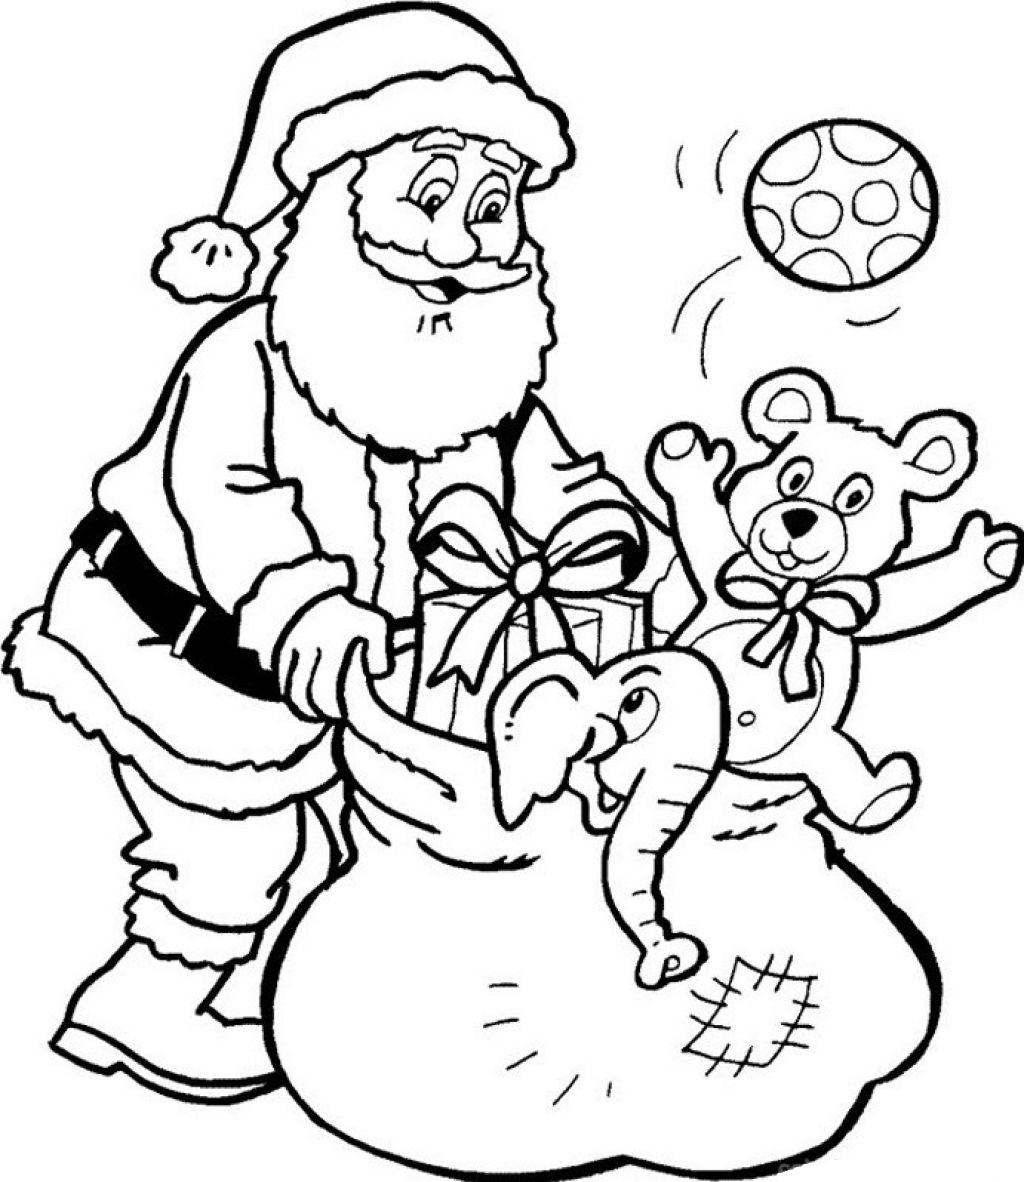 Children's Christmas Coloring Pages Free Christmas Coloring Pages Printable Free Download Best Christmas